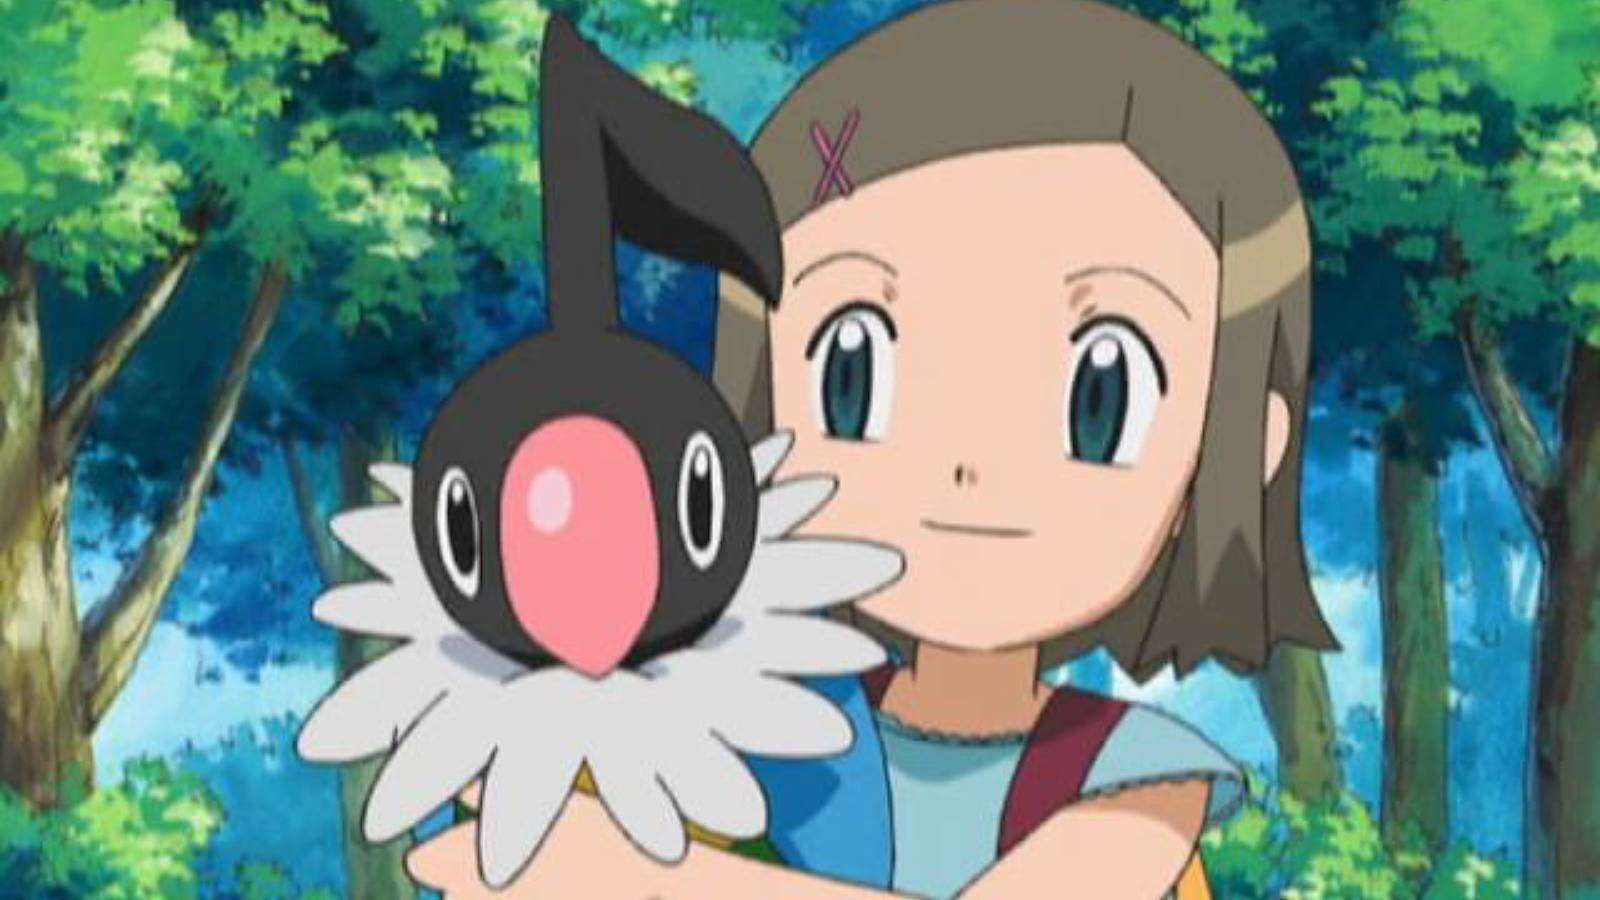 A screenshot from the Pokemon anime shows a young girl holding a Chatot